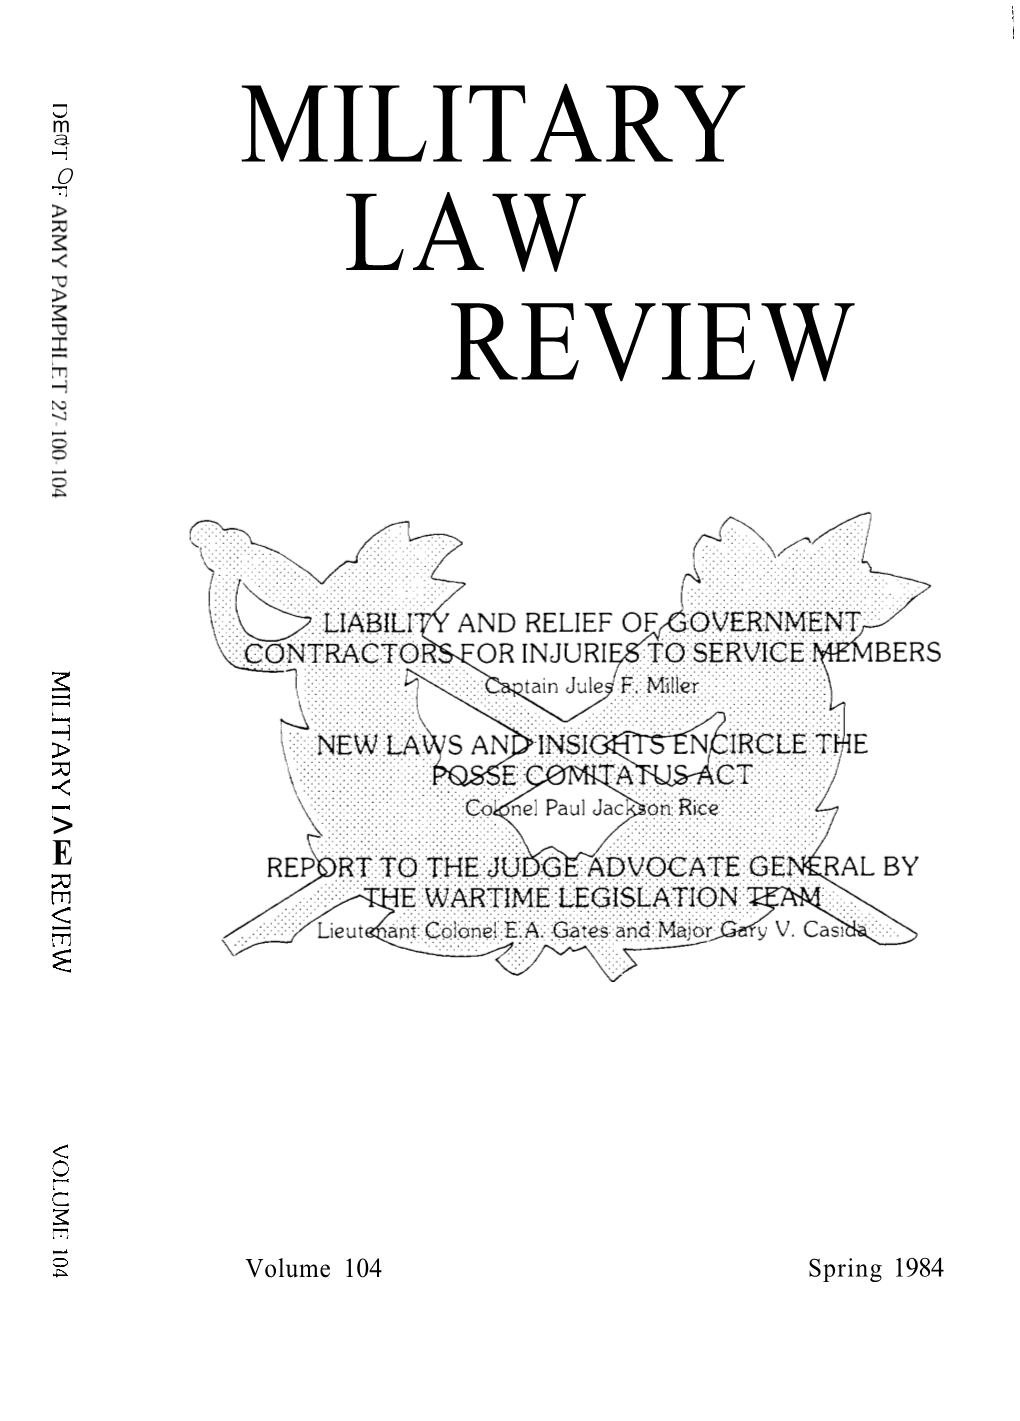 Military Law Review-Vol